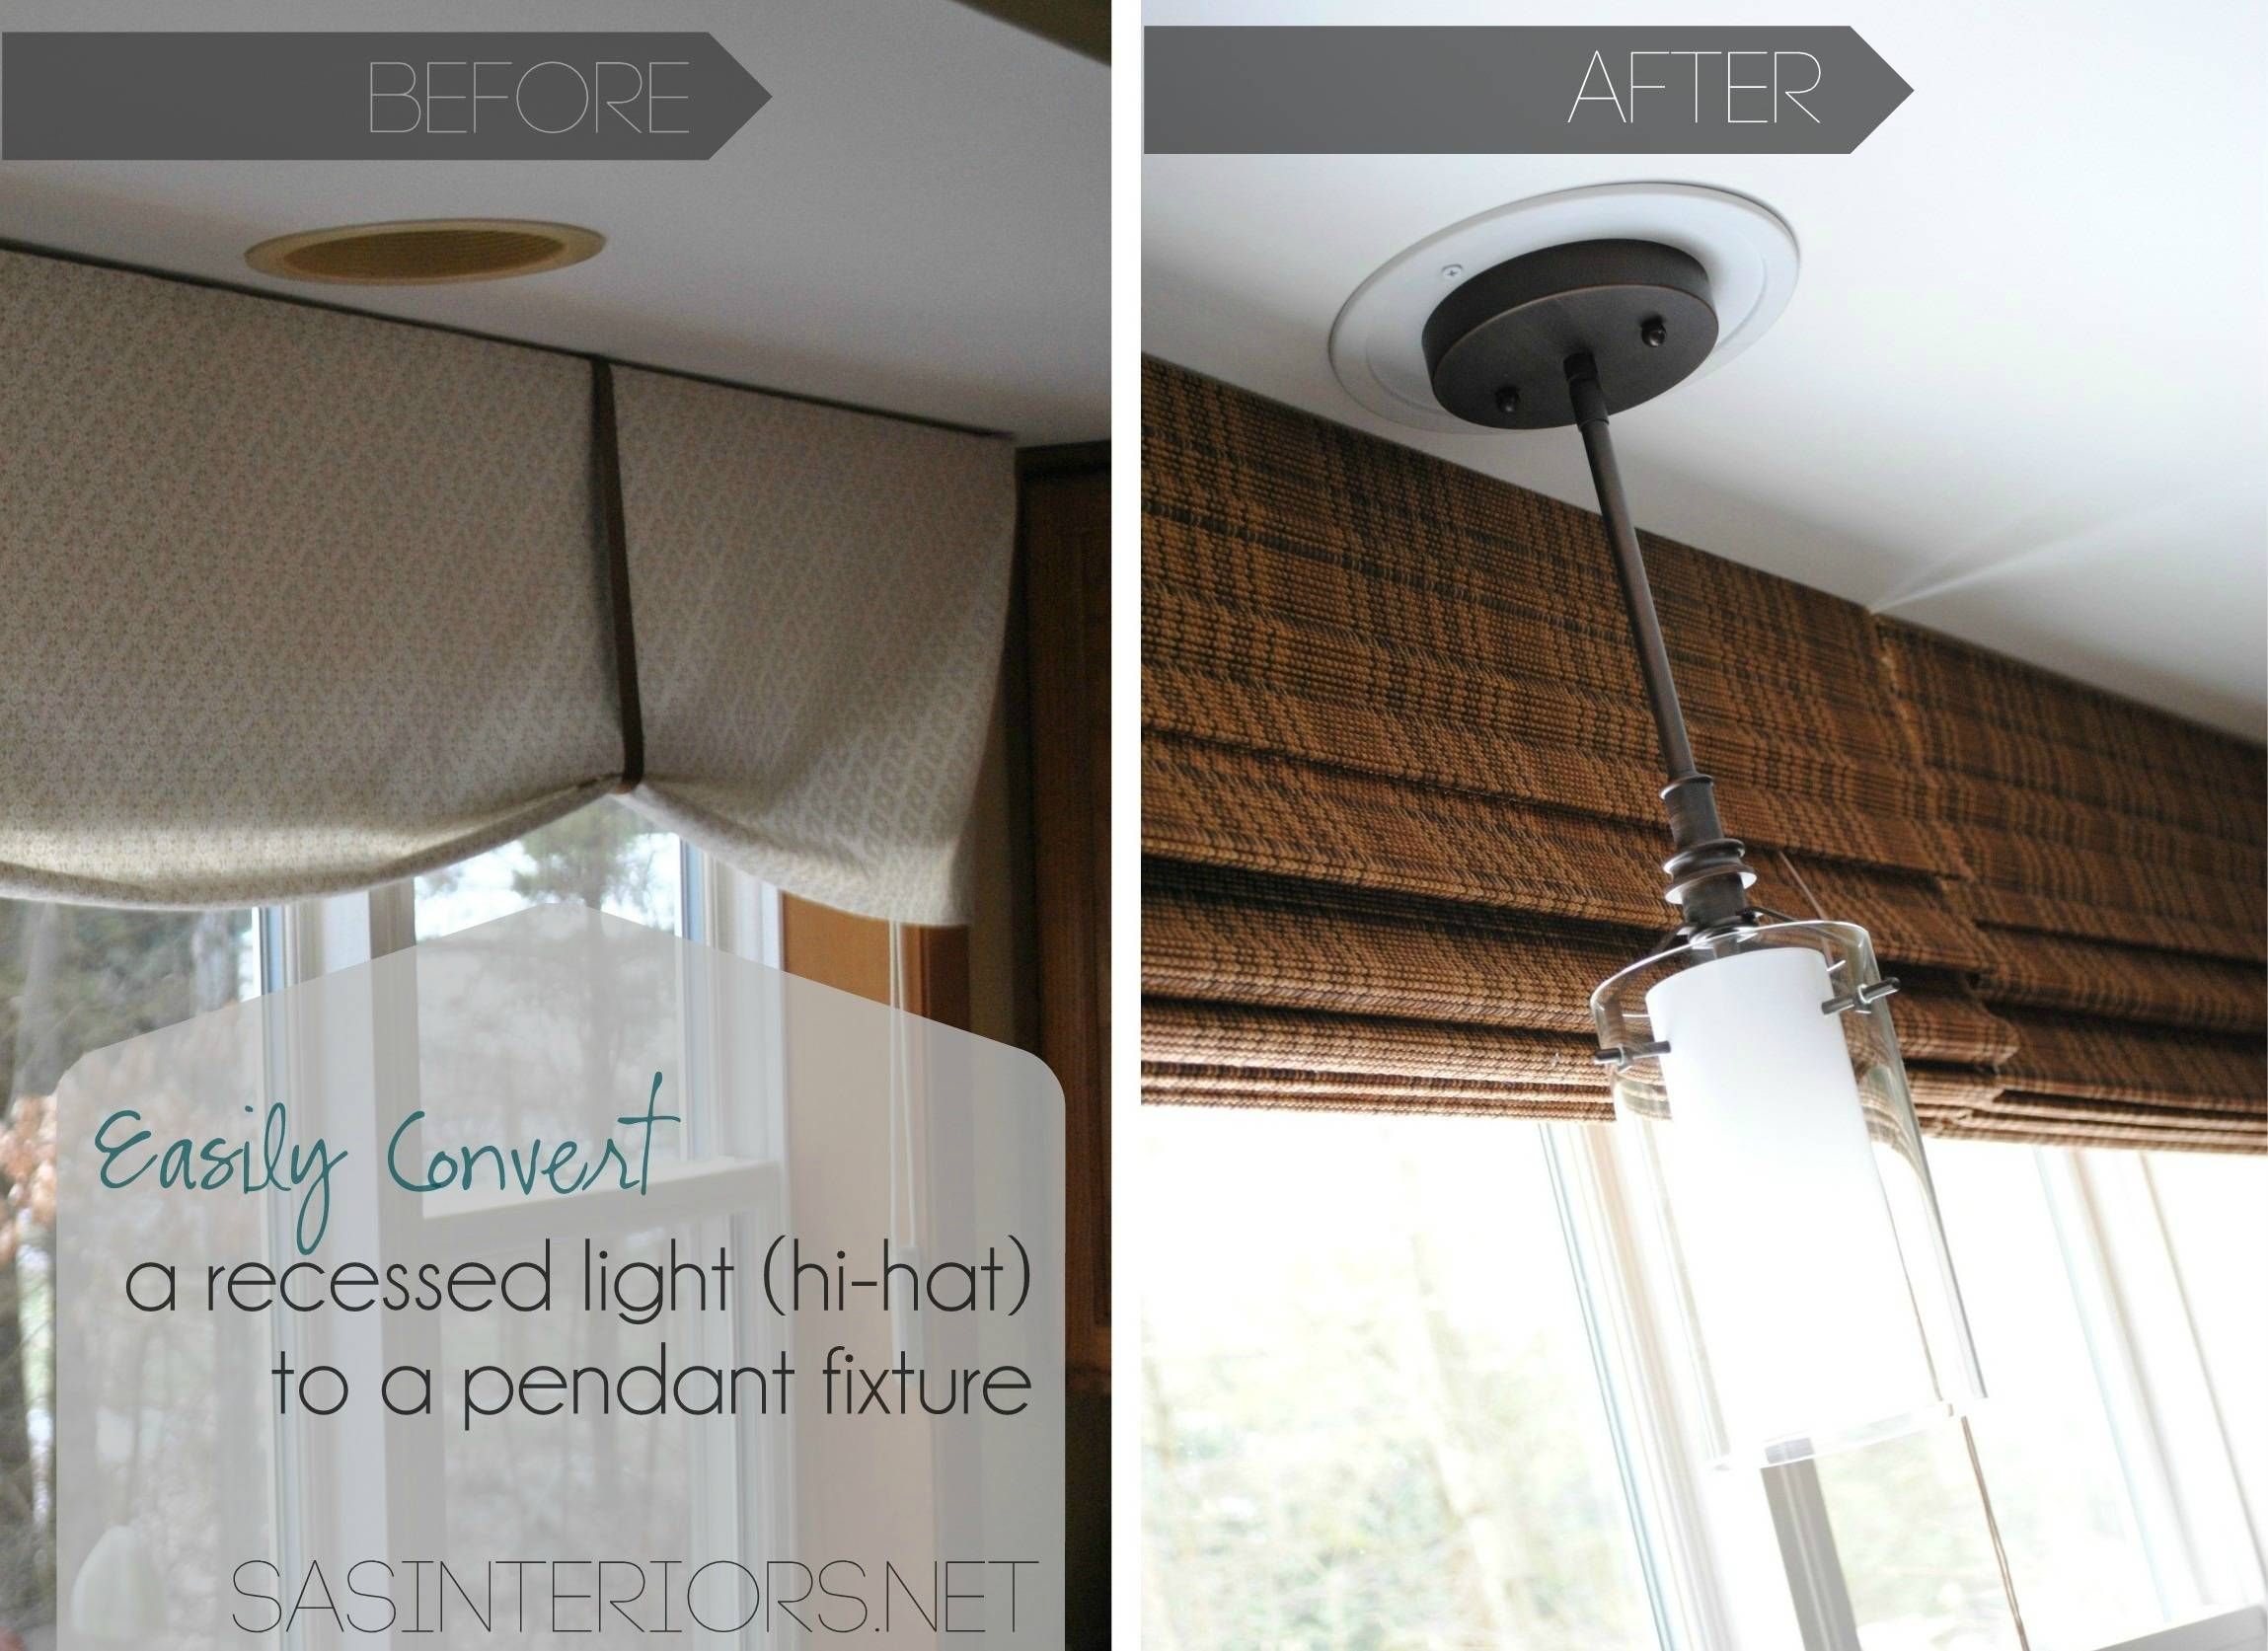 Decorating: Appealing Recessed Light Conversion Kit For Ceiling Inside Recessed Lighting Pendants (View 4 of 15)